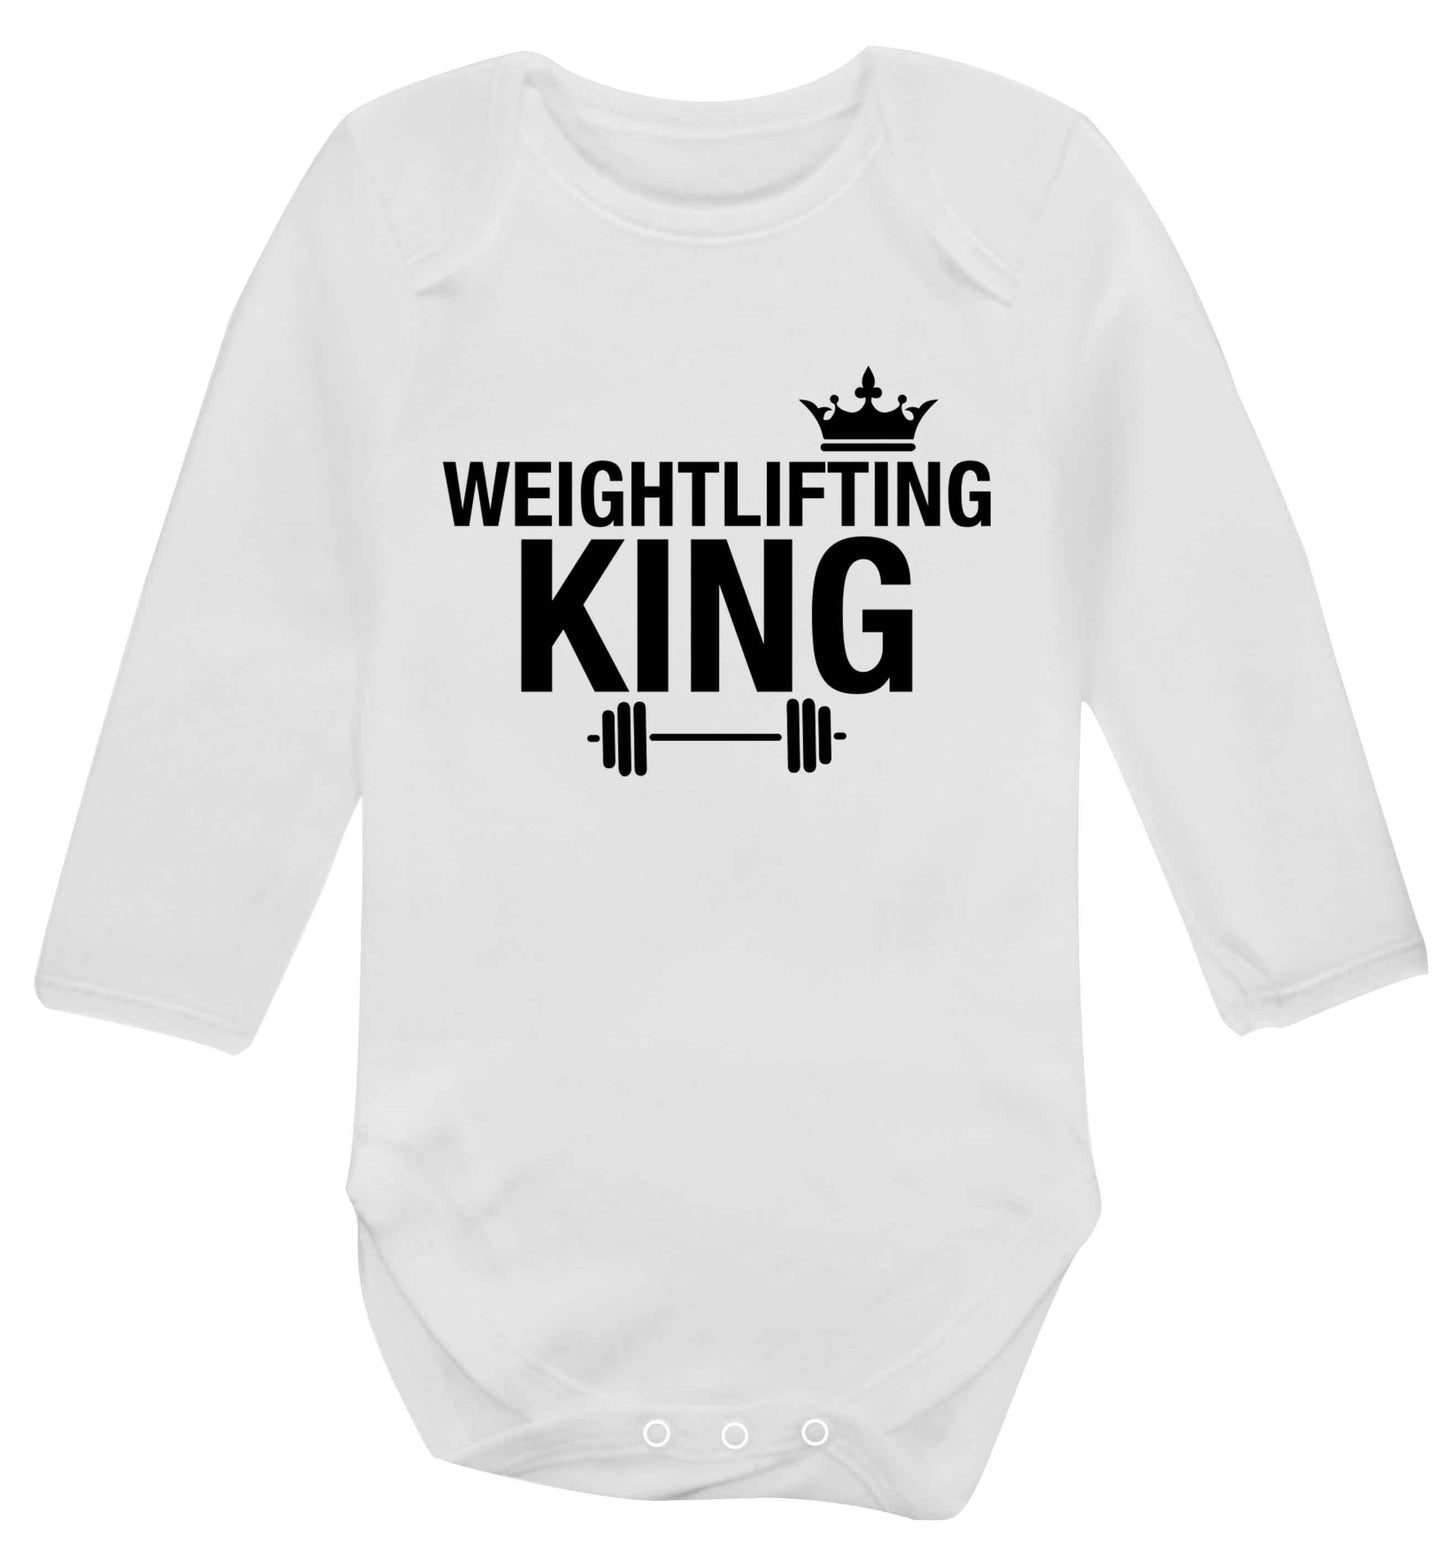 Weightlifting king Baby Vest long sleeved white 6-12 months